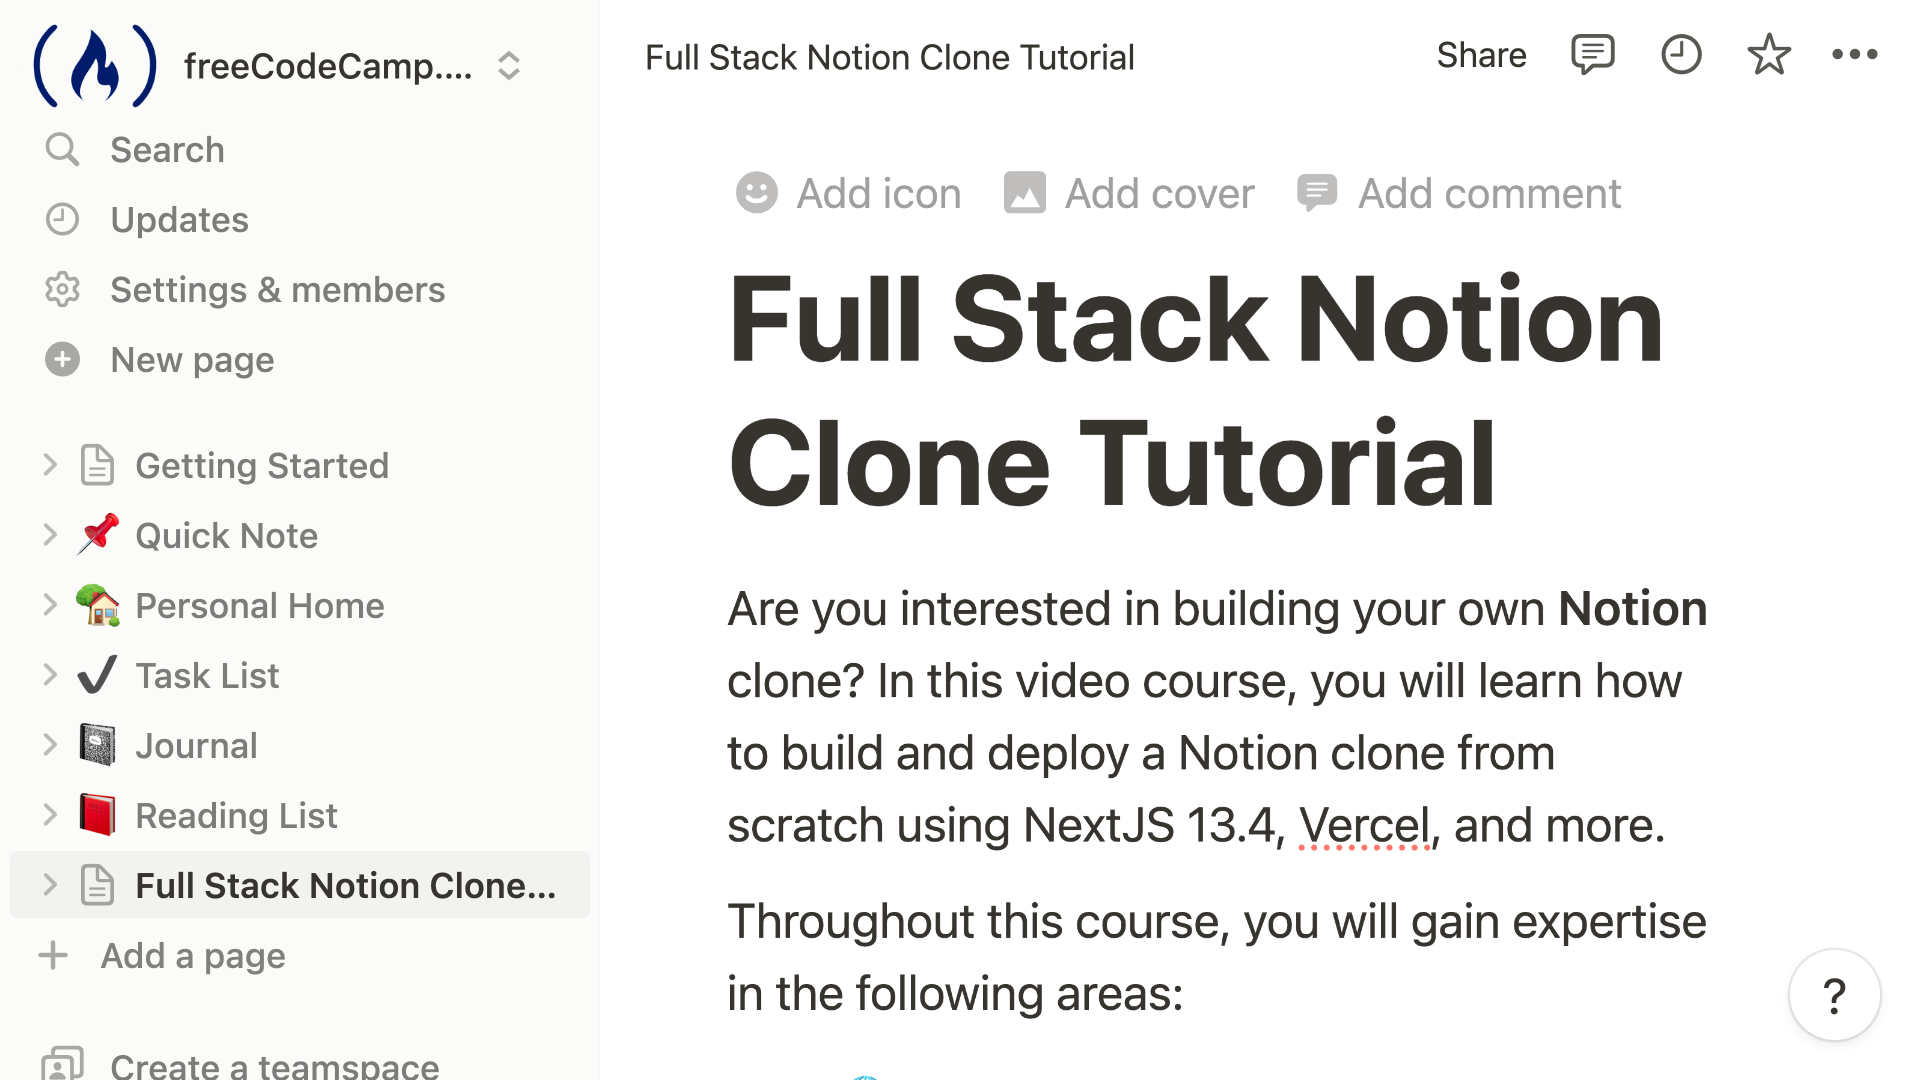 Build and Deploy a Full Stack Notion Clone with Next.js, DALL-E, Vercel